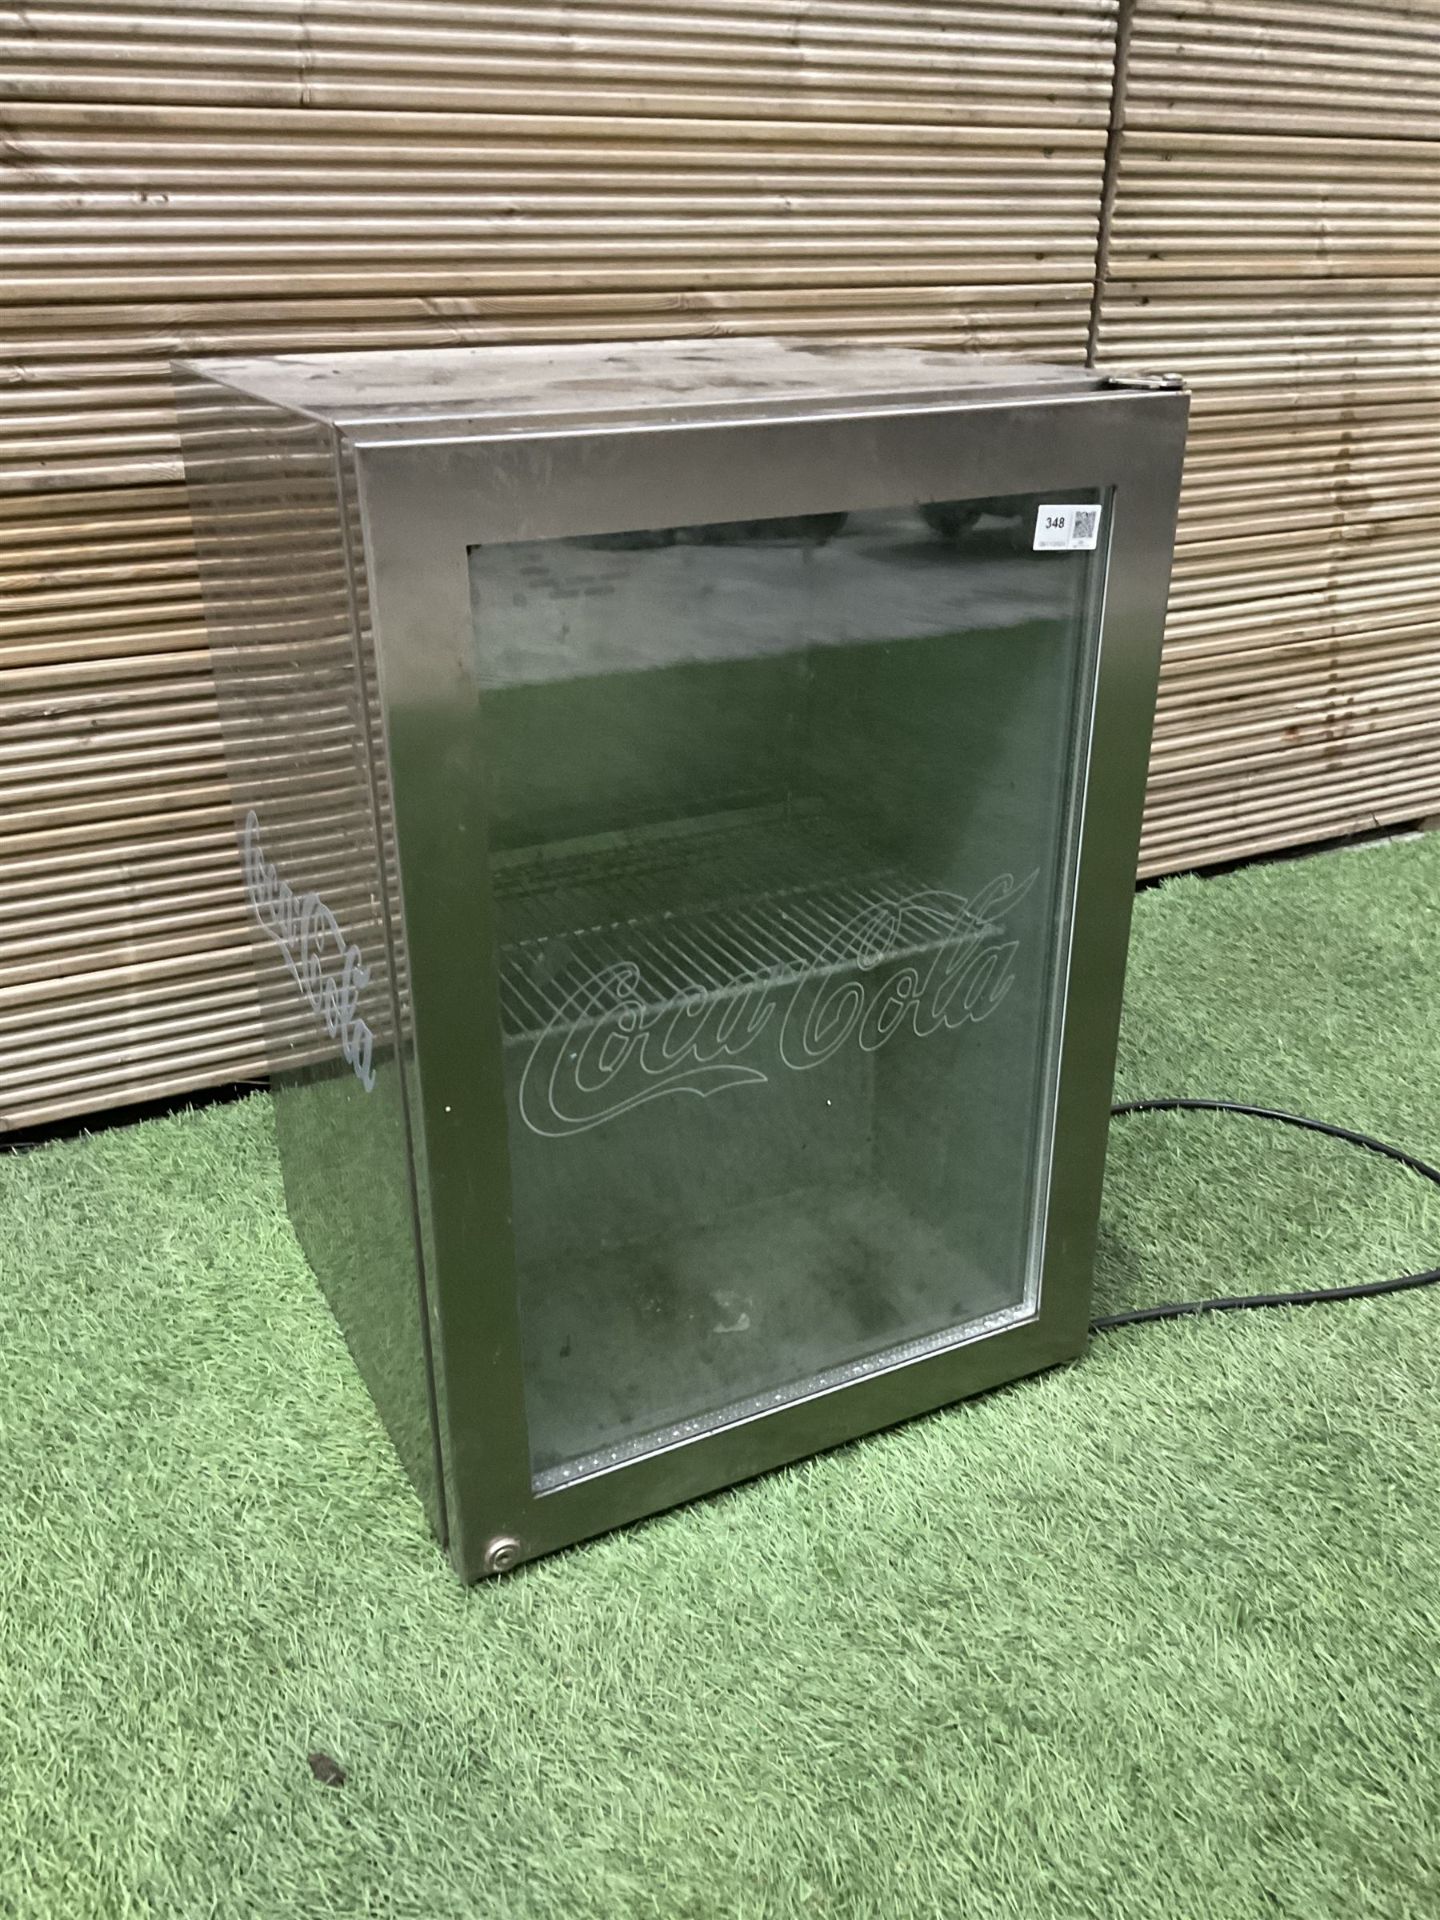 CocaCola stainless steel see trough mini fridge - THIS LOT IS TO BE COLLECTED BY APPOINTMENT FROM D